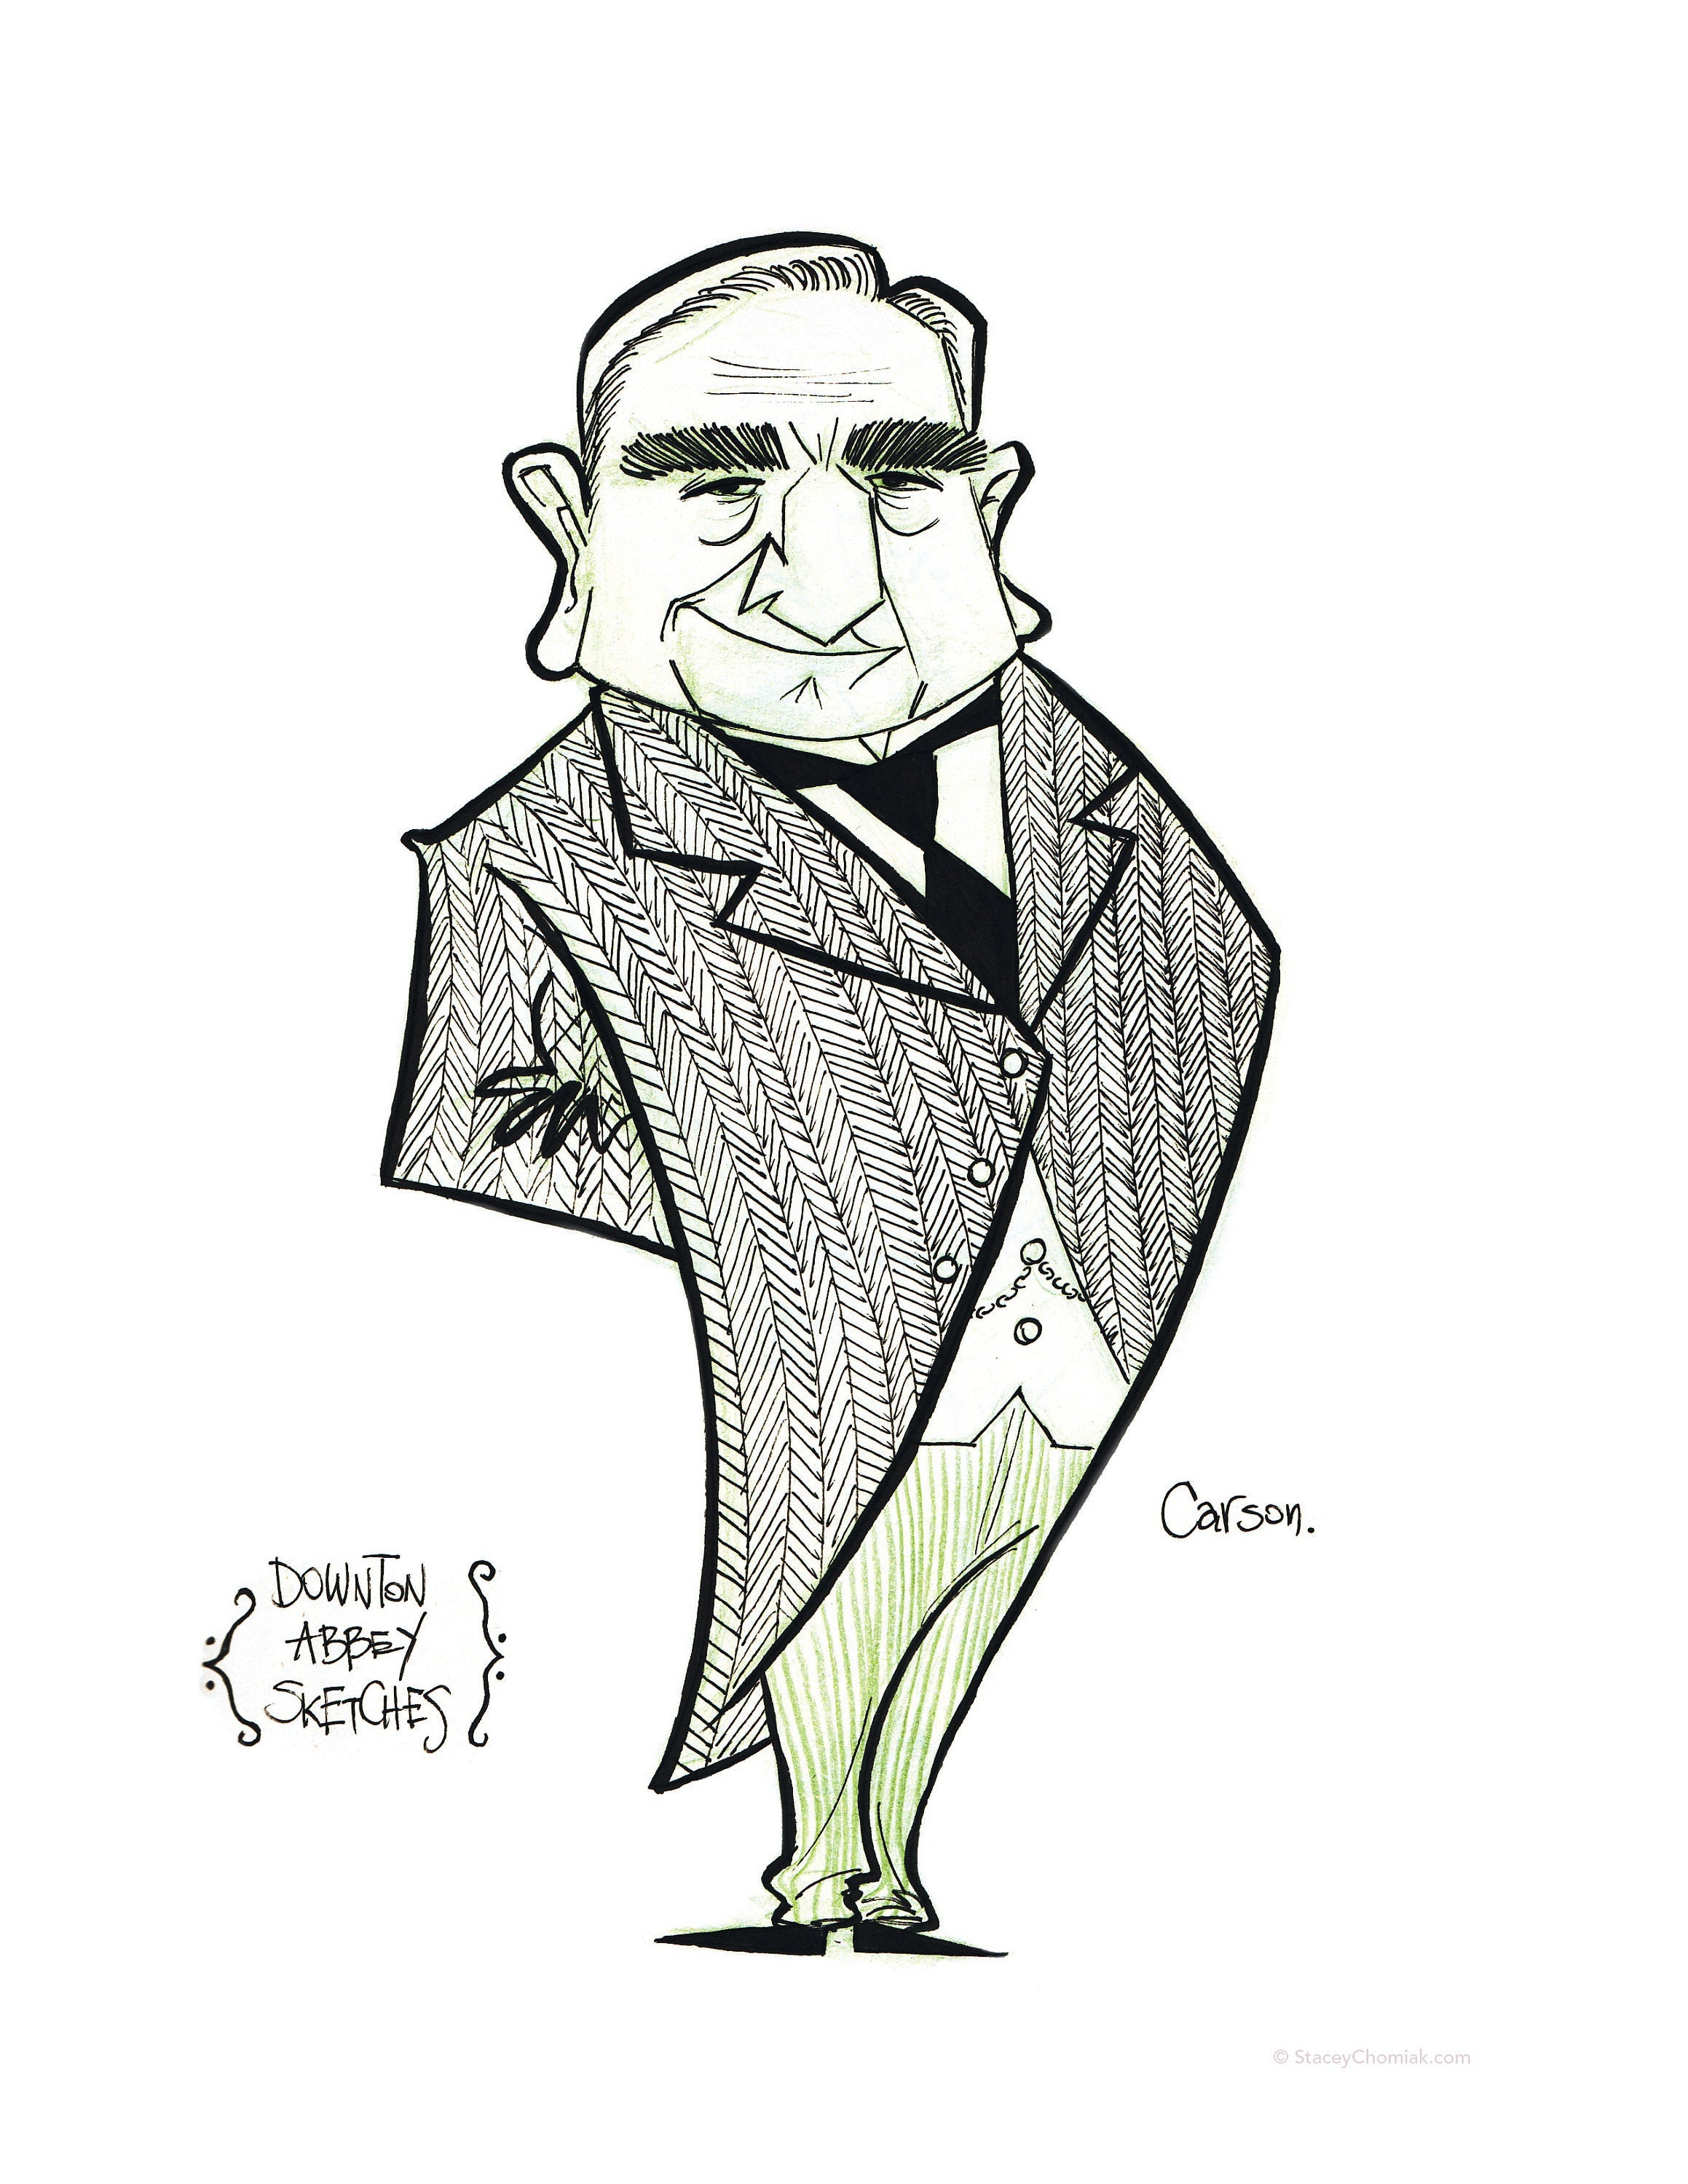 Buy Illustration of Charles Carson From downton Abbey Online in India  Etsy